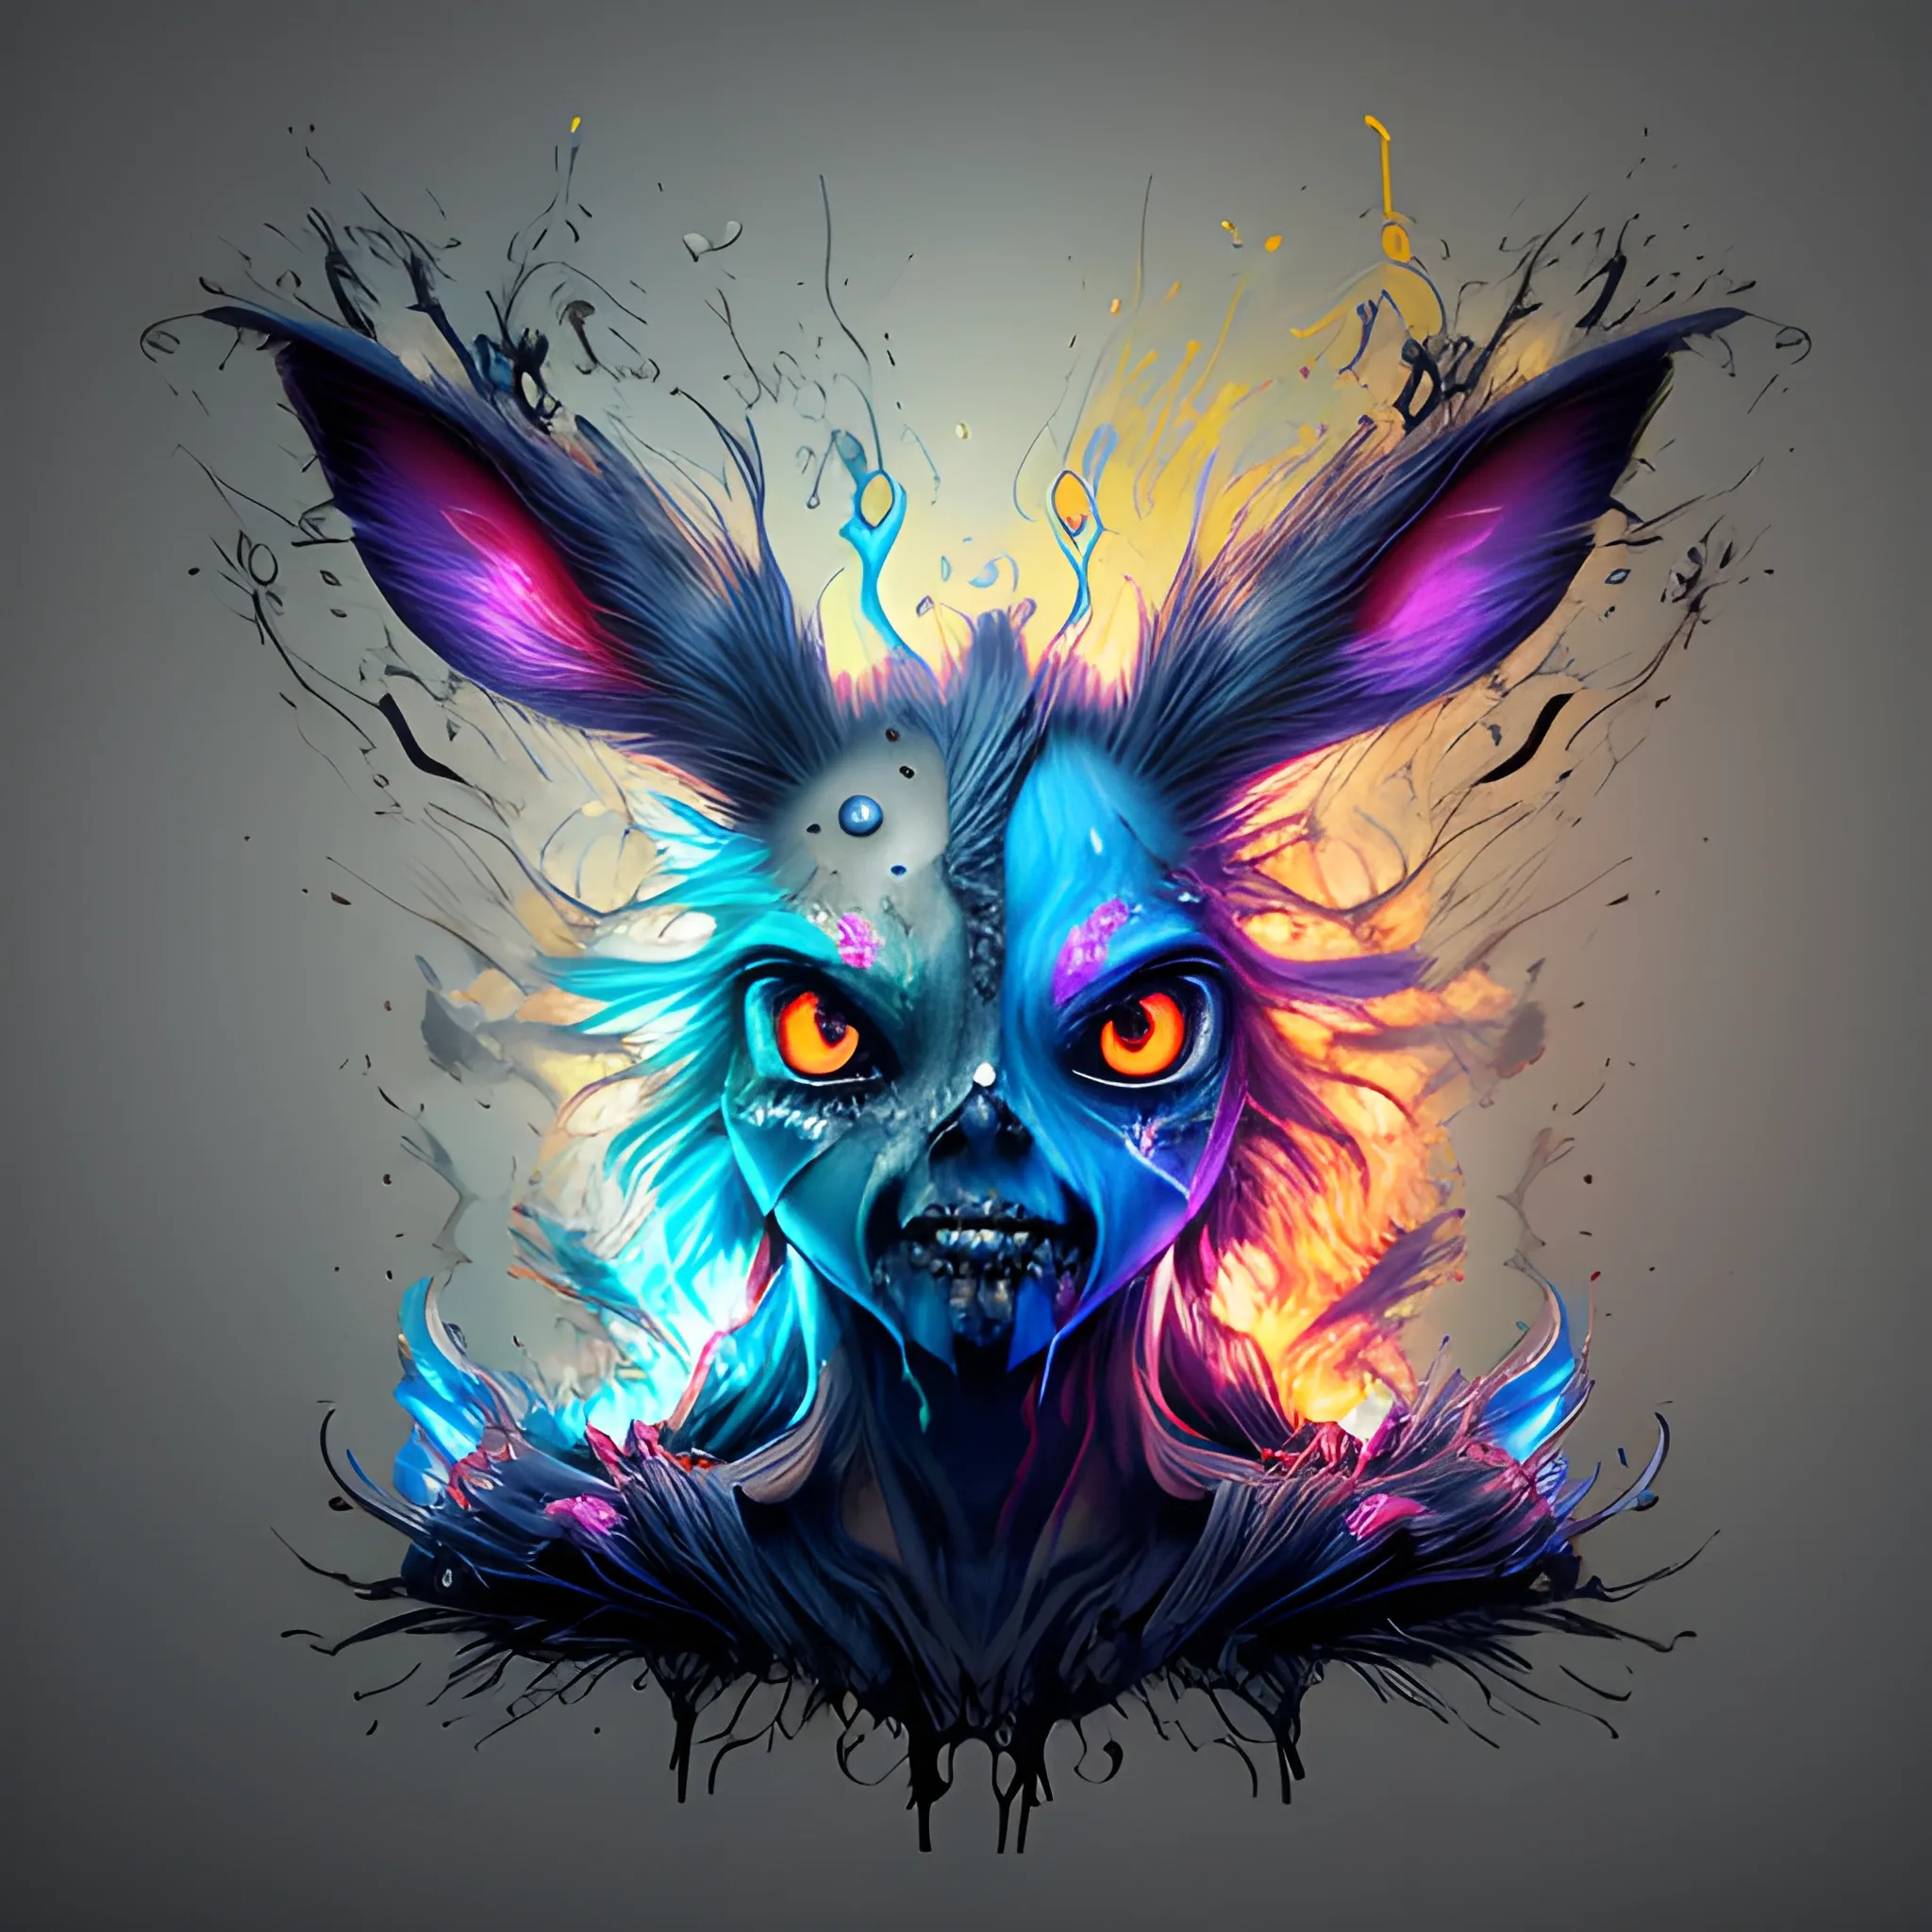 Zombie Eevee, Hyperdetailed Eyes, Tee-Shirt Design, Line Art, Black Background, Ultra Detailed Artistic, Detailed Gorgeous Face, Natural Skin, Neon colors, Water Splash, Colour Splash Art, Fire and Ice, Splatter, Black Ink, Liquid Melting, Dreamy, Glowing, Glamour, Glimmer, Shadows, Oil On Canvas, Brush Strokes, Smooth, Ultra High Definition, 8k, Unreal Engine 5, Ultra Sharp Focus, Intricate Artwork Masterpiece, Ominous, Golden Ratio, Highly Detailed, Vibrant, Production Cinematic Character Render, Ultra High Quality Model